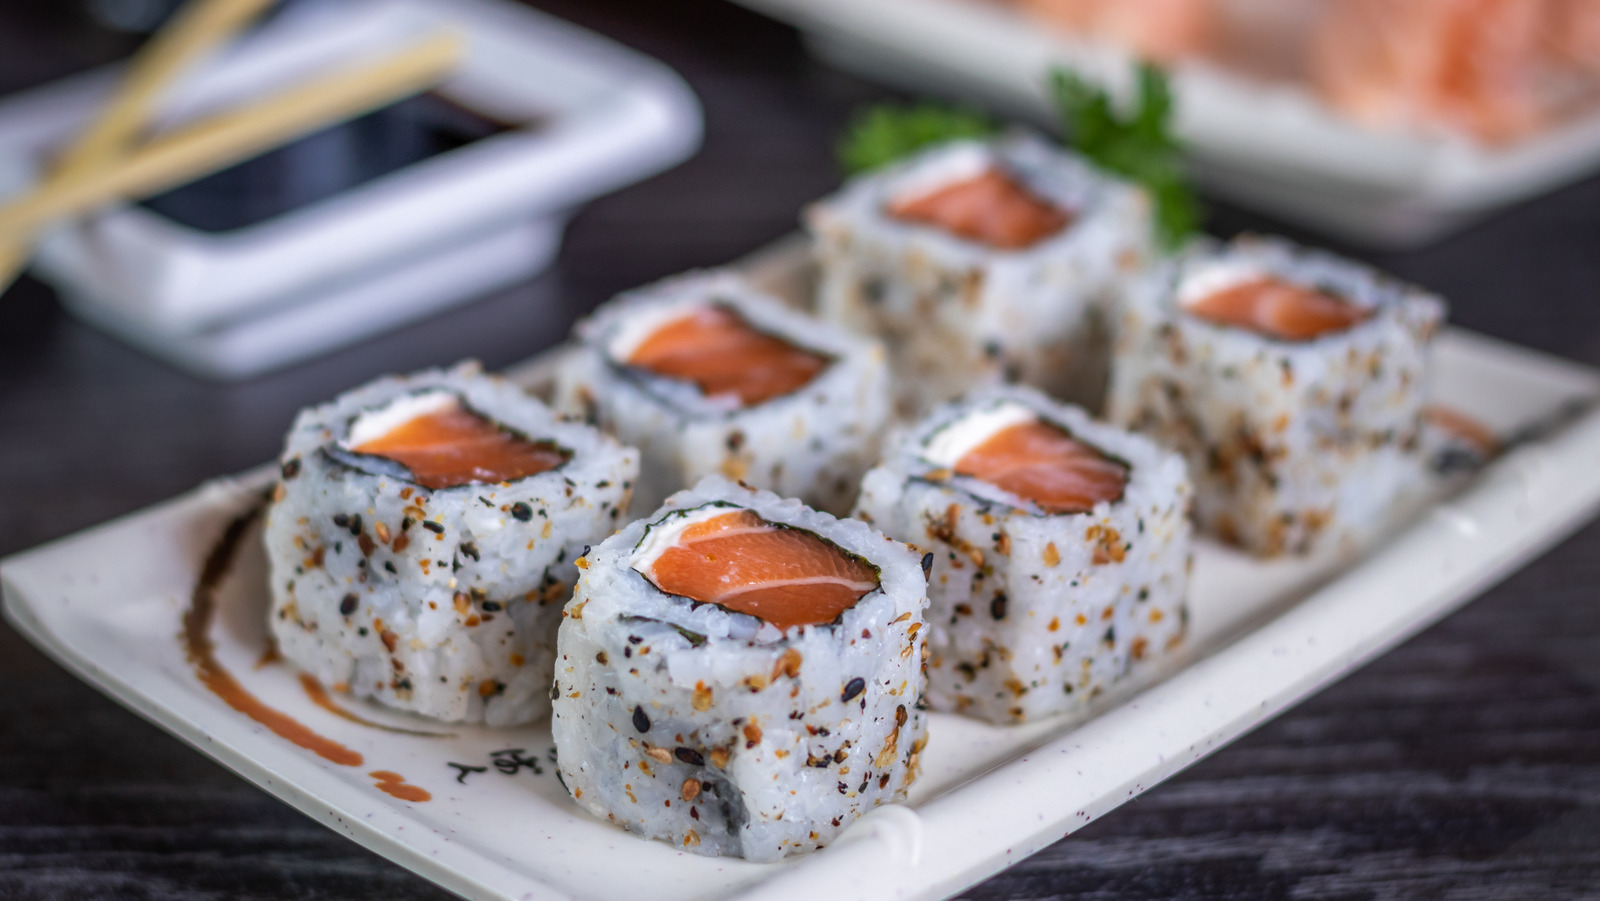 Why Ordering Uramaki Rolls At Sushi Restaurants Is A Waste Of Money